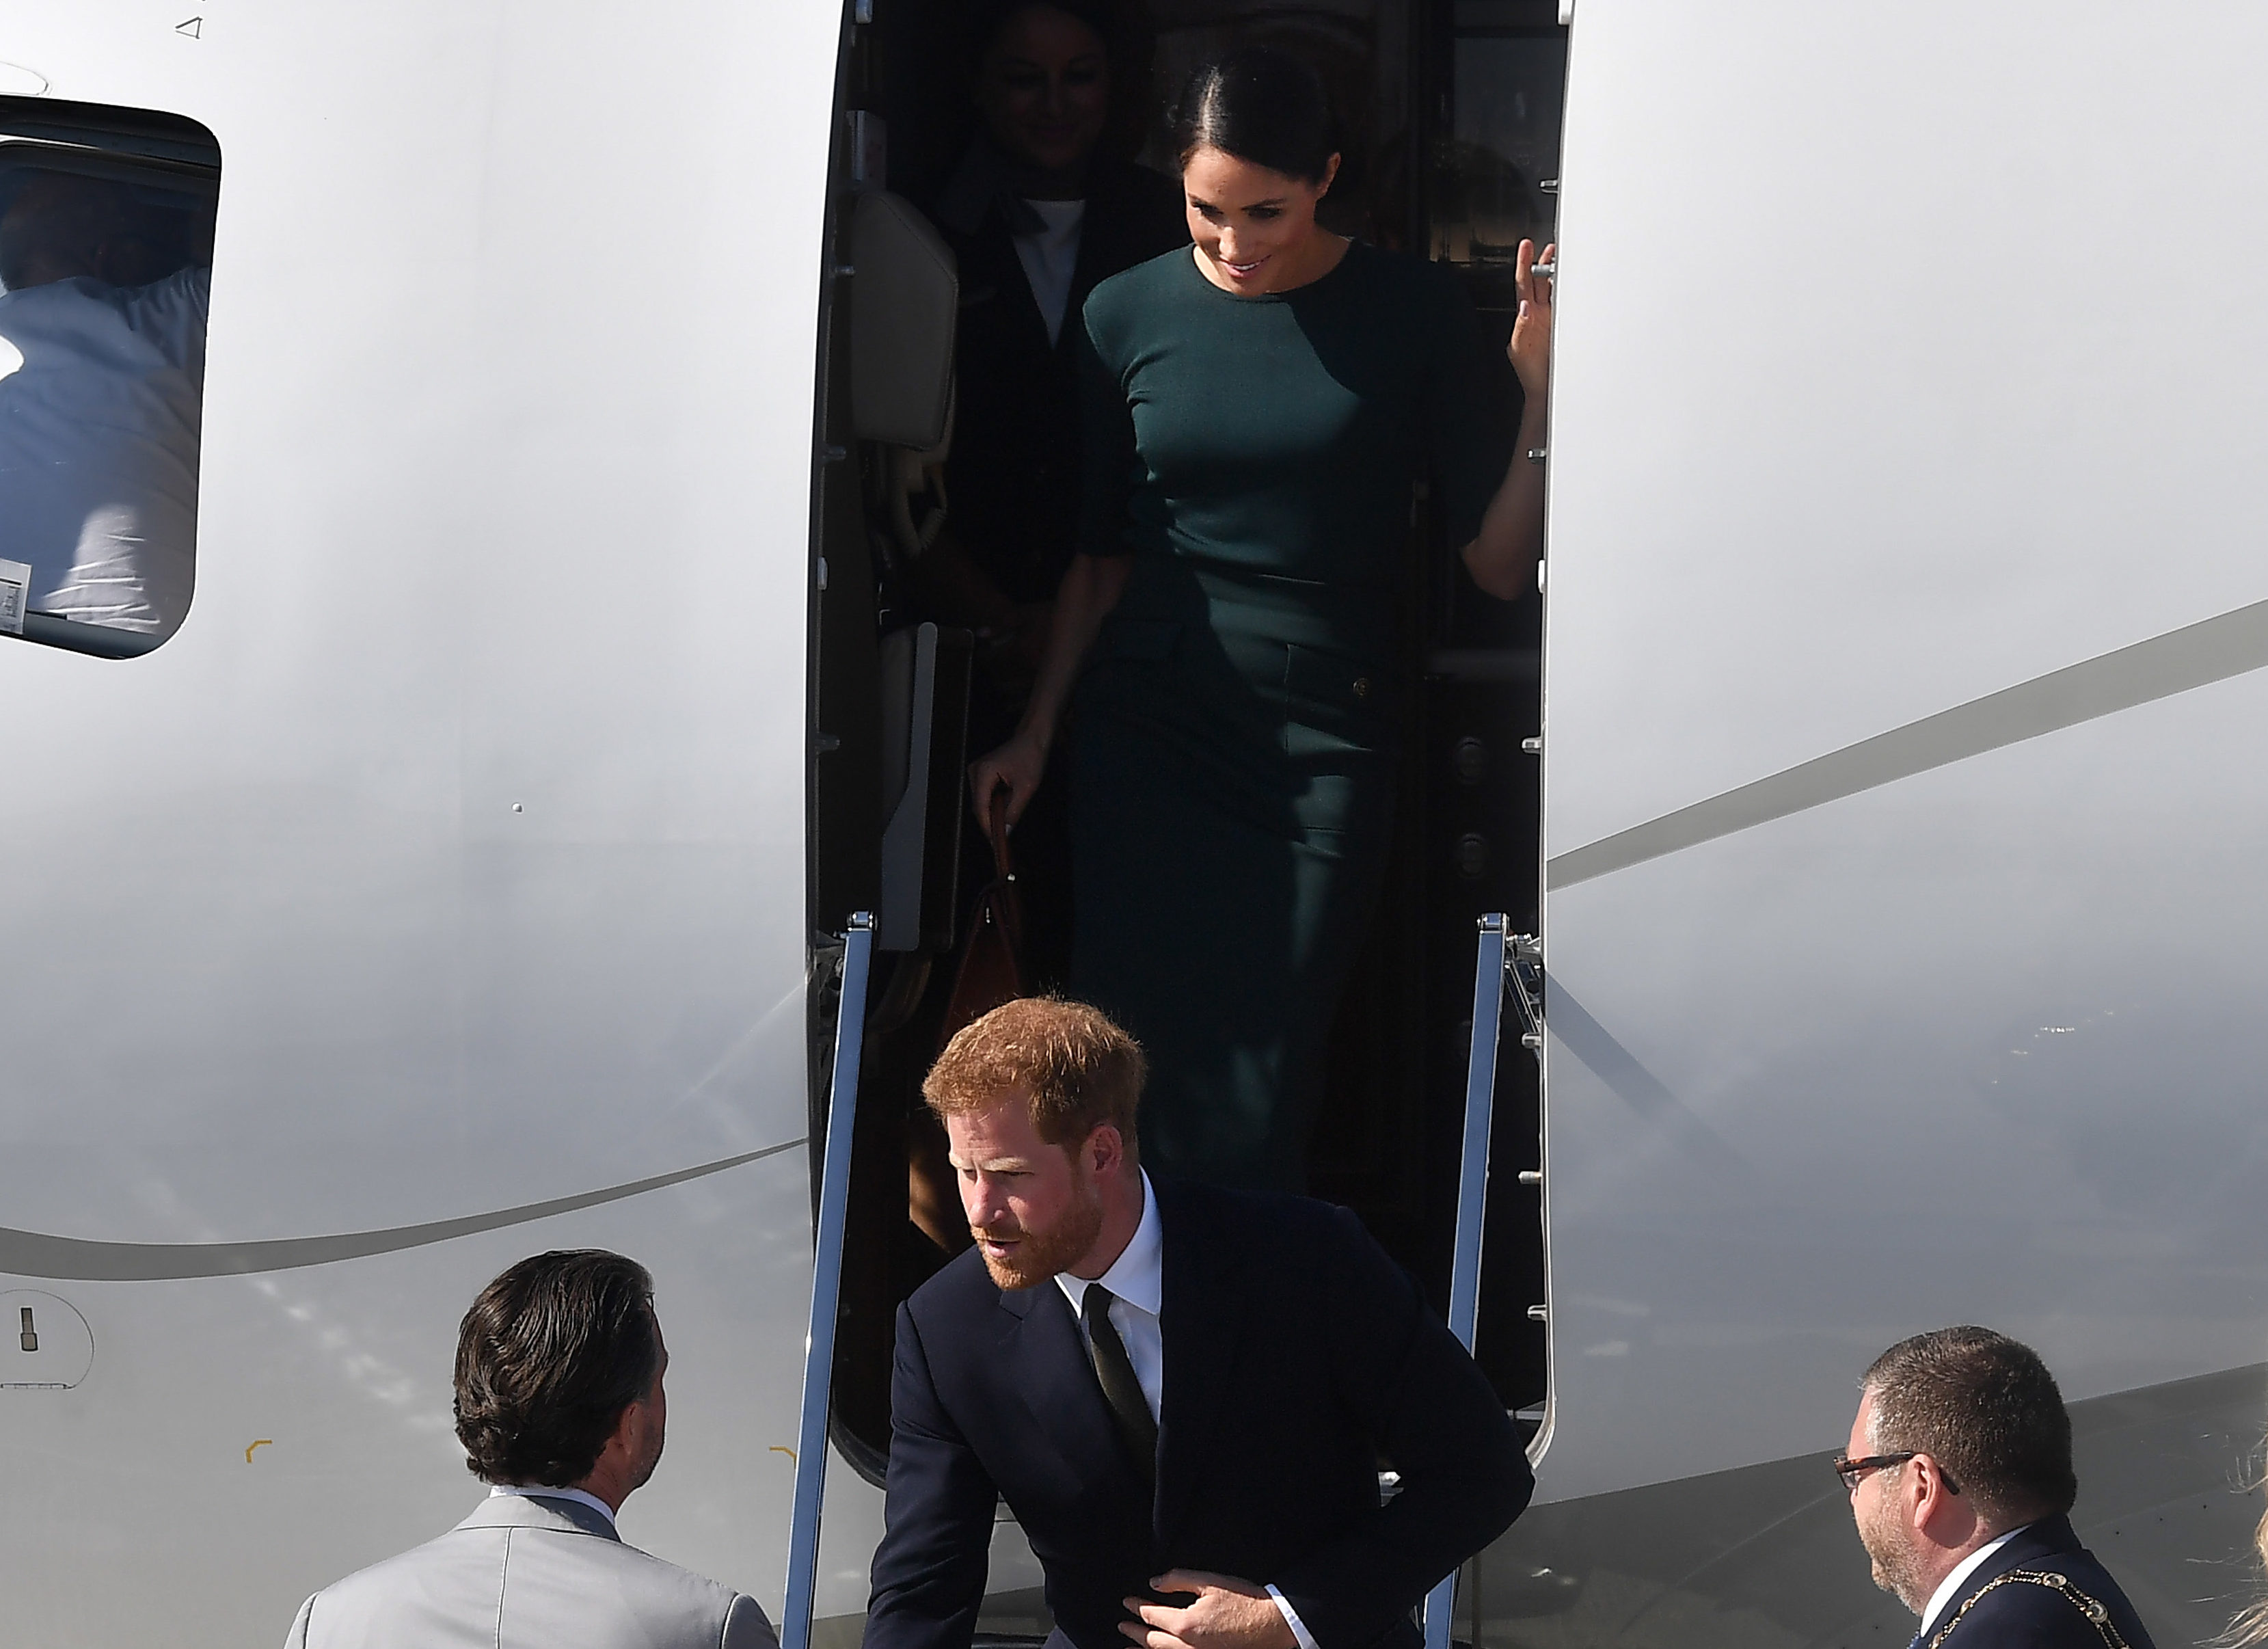 Prince Harry, Duke of Sussex and Meghan, Duchess of Sussex arrive at Dublin city airport on their official two day royal visit to Ireland, 2018.